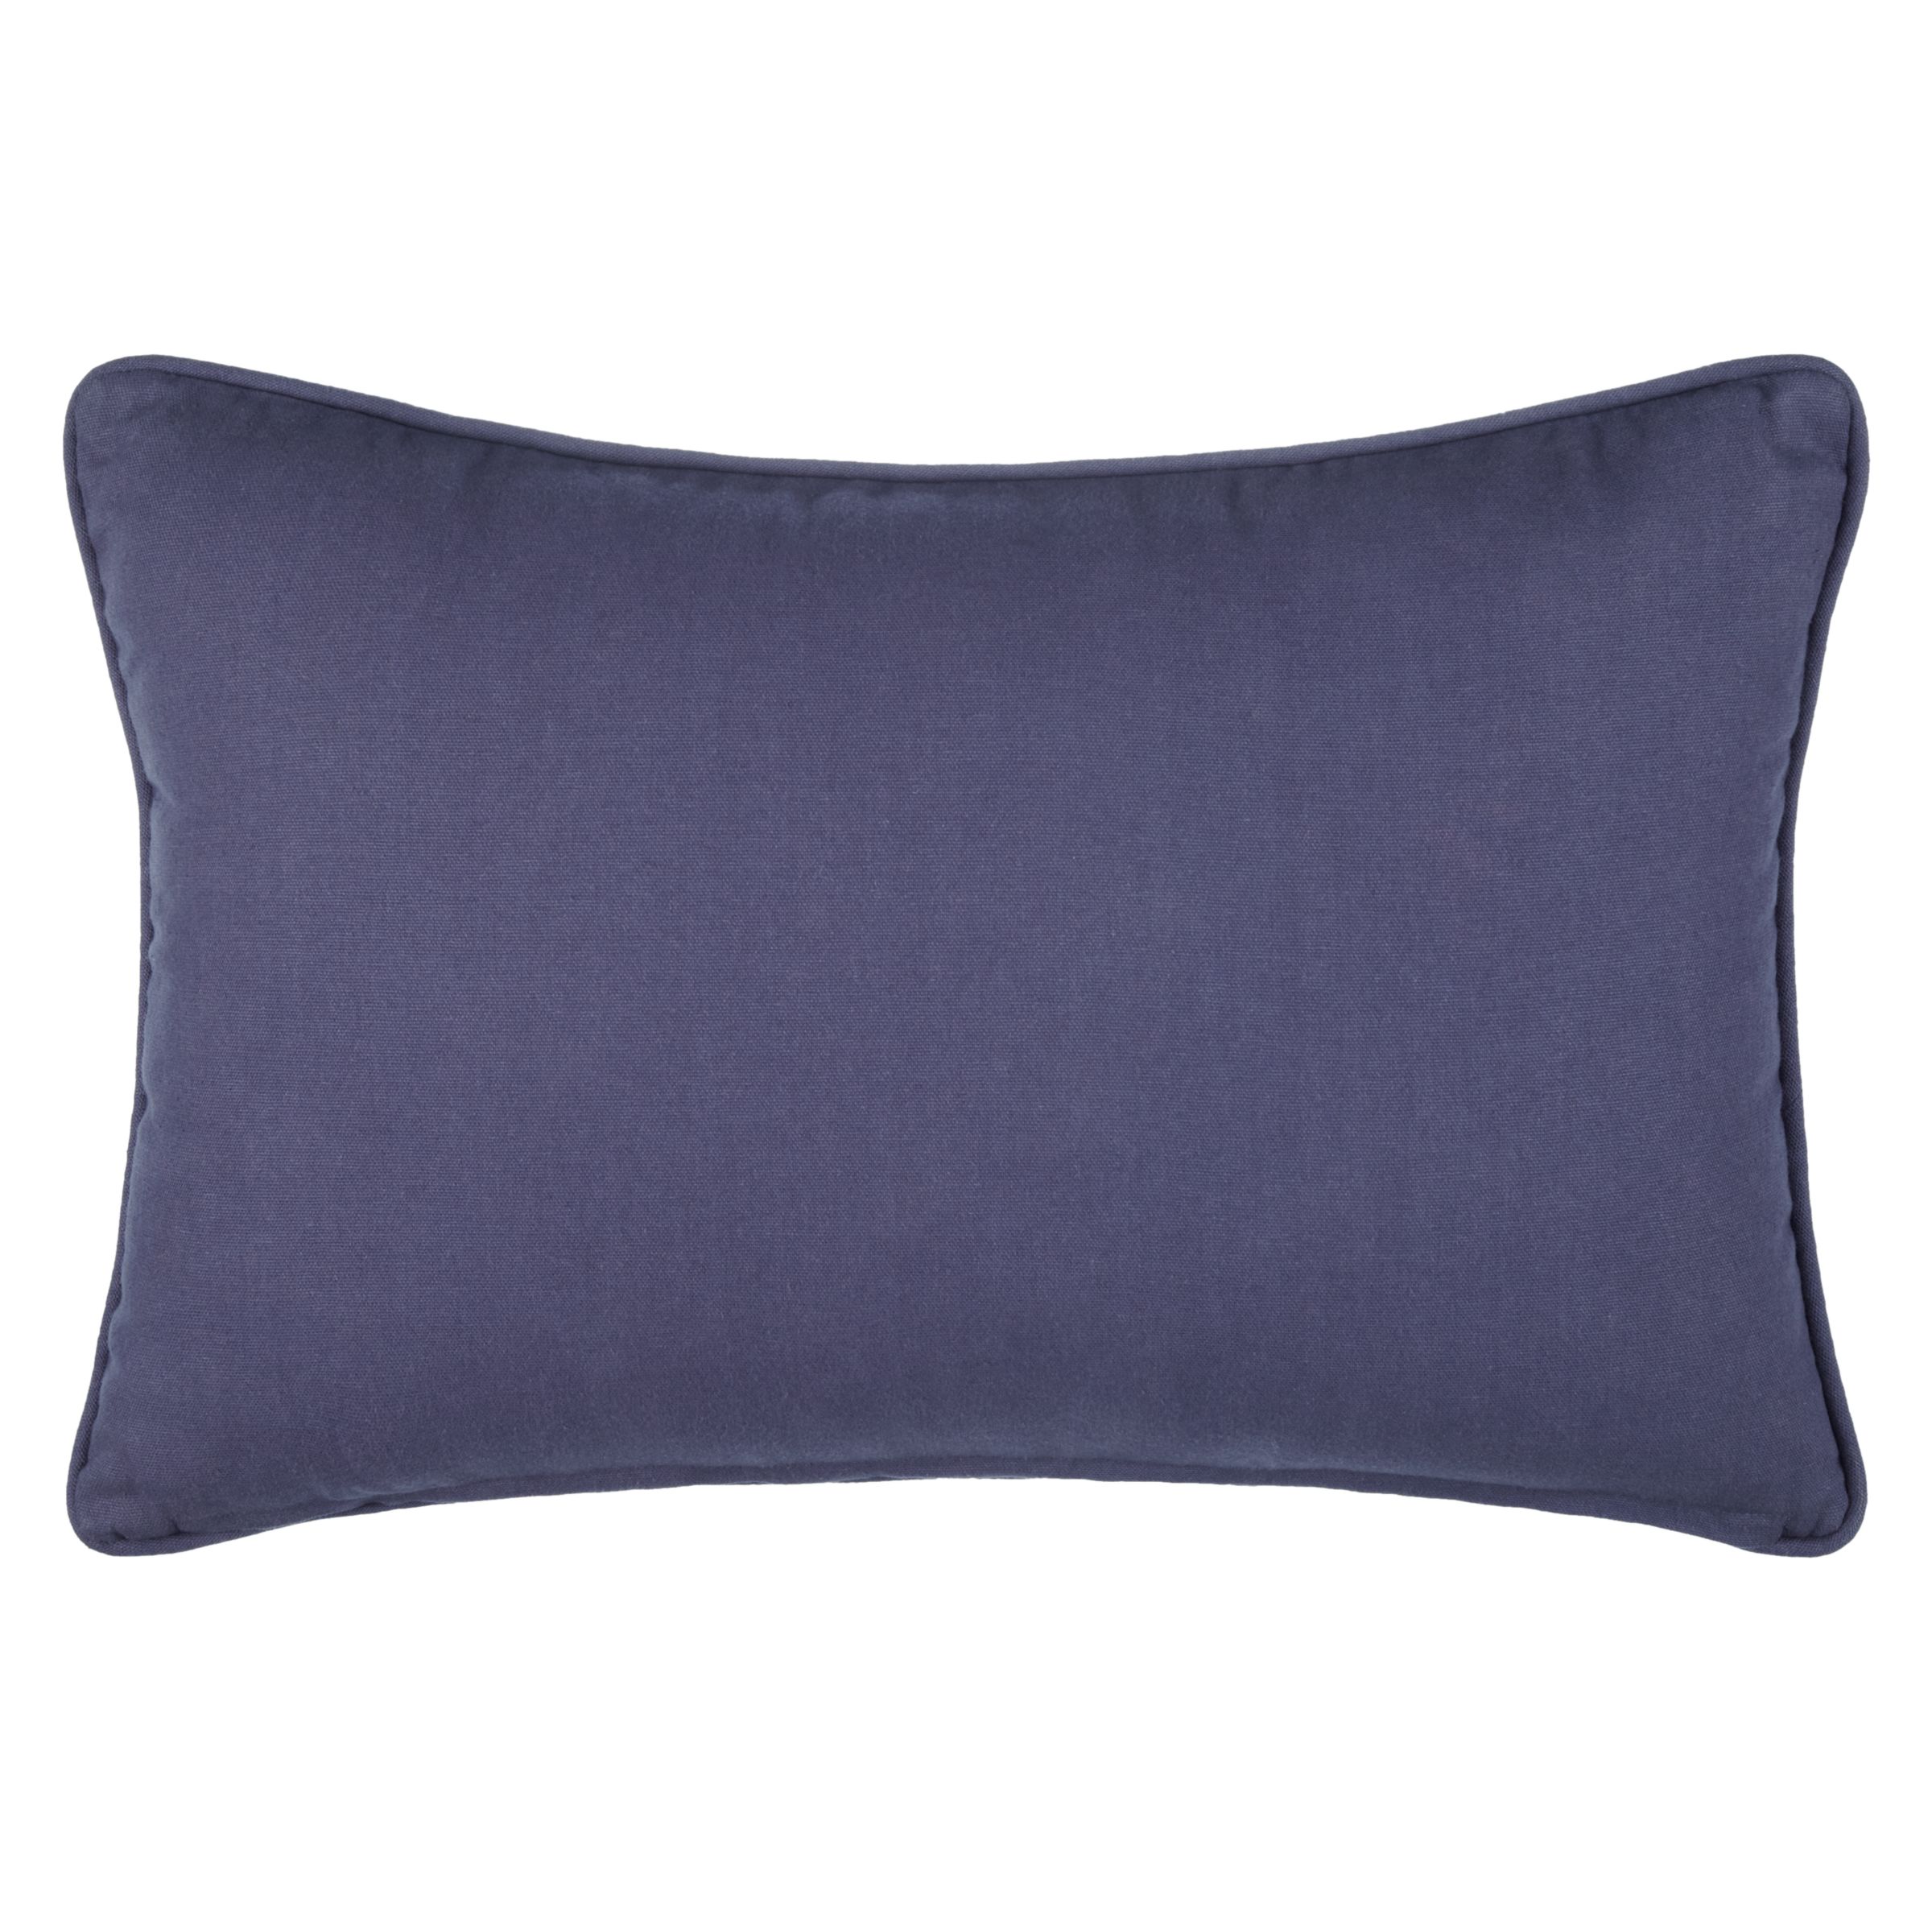 John Lewis & Partners Ikat Rectangle Outdoor Scatter Cushion